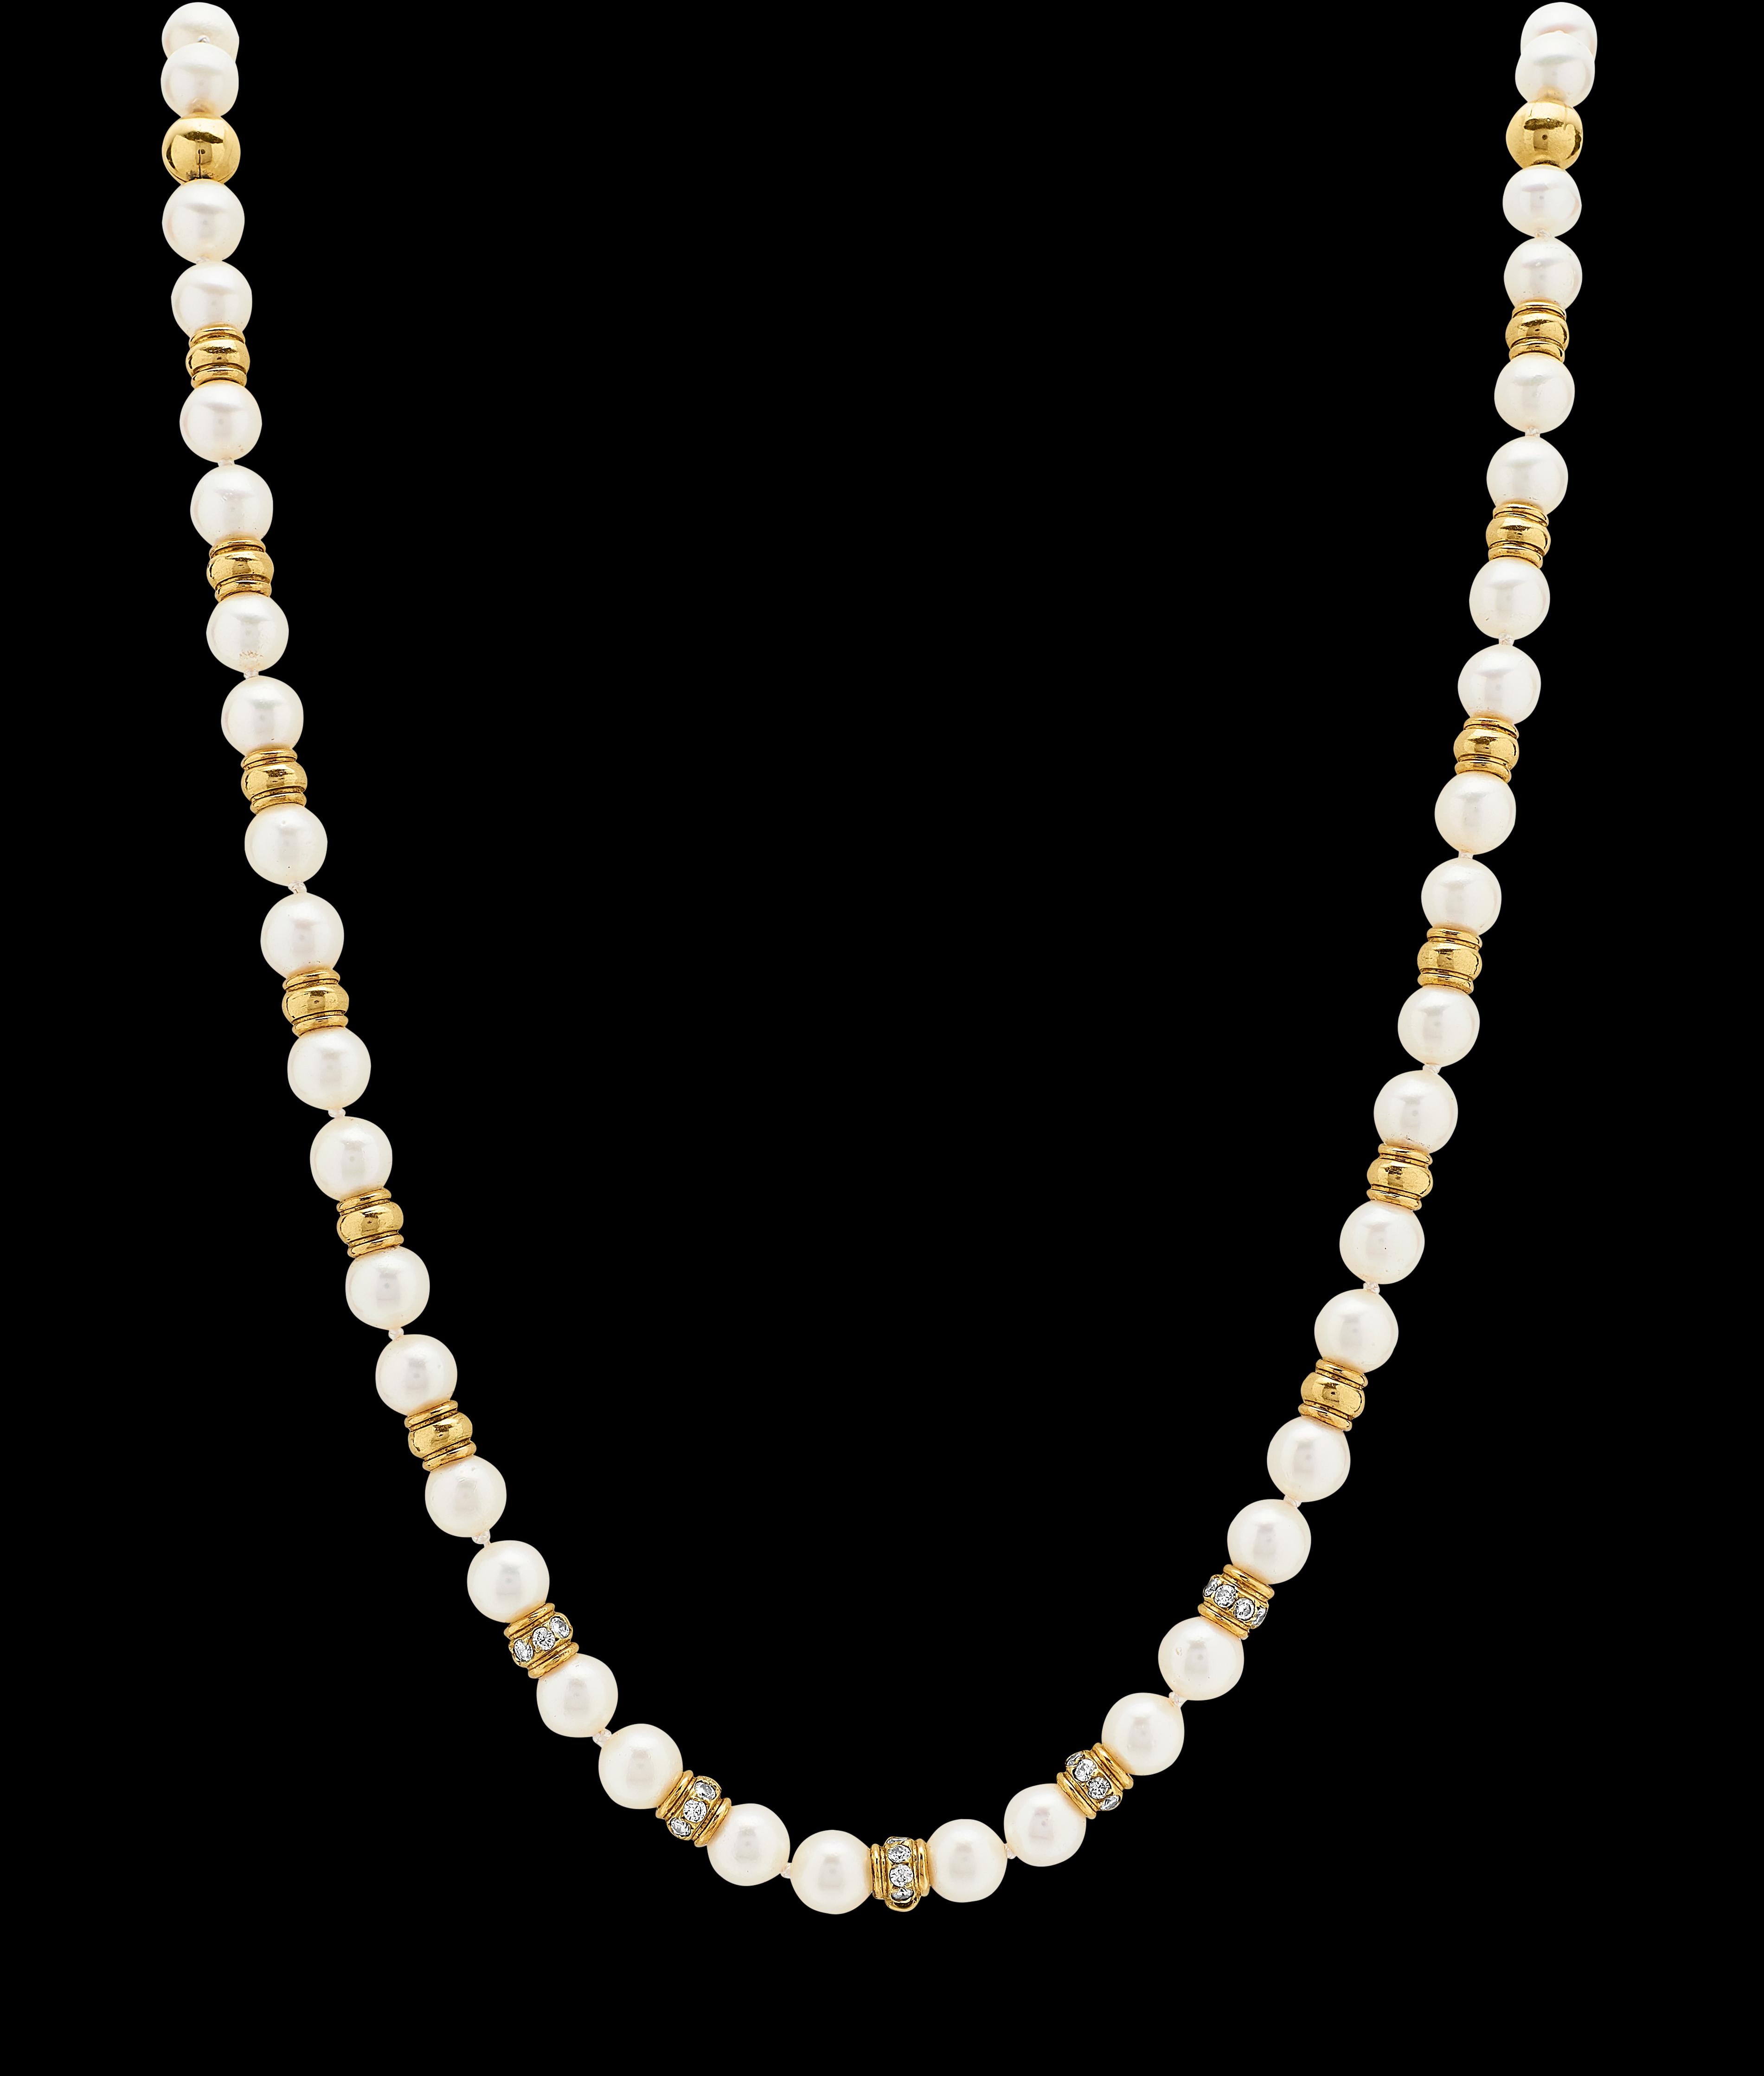 Single strand sea water cultured pearl necklace with diamond embedded beads and plain gold beads  in 18K gold. Finished with a hidden box clasp and safety chain.
Pearl Dimension: from 5.8 to 5.5 mm
38 x melee round brilliant cut diamonds approximate